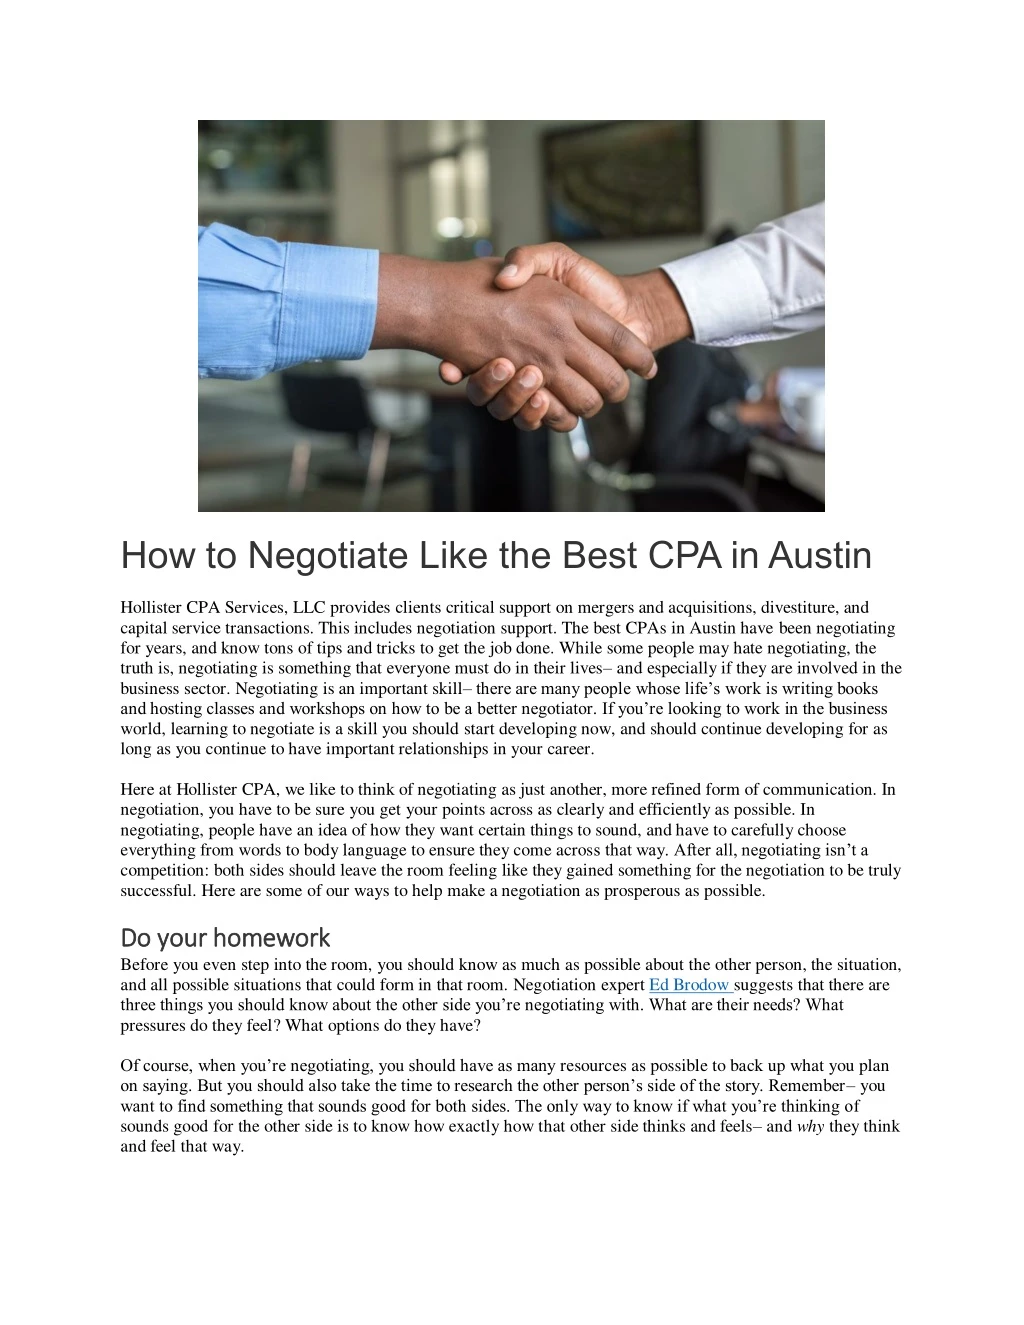 how to negotiate like the best cpa in austin